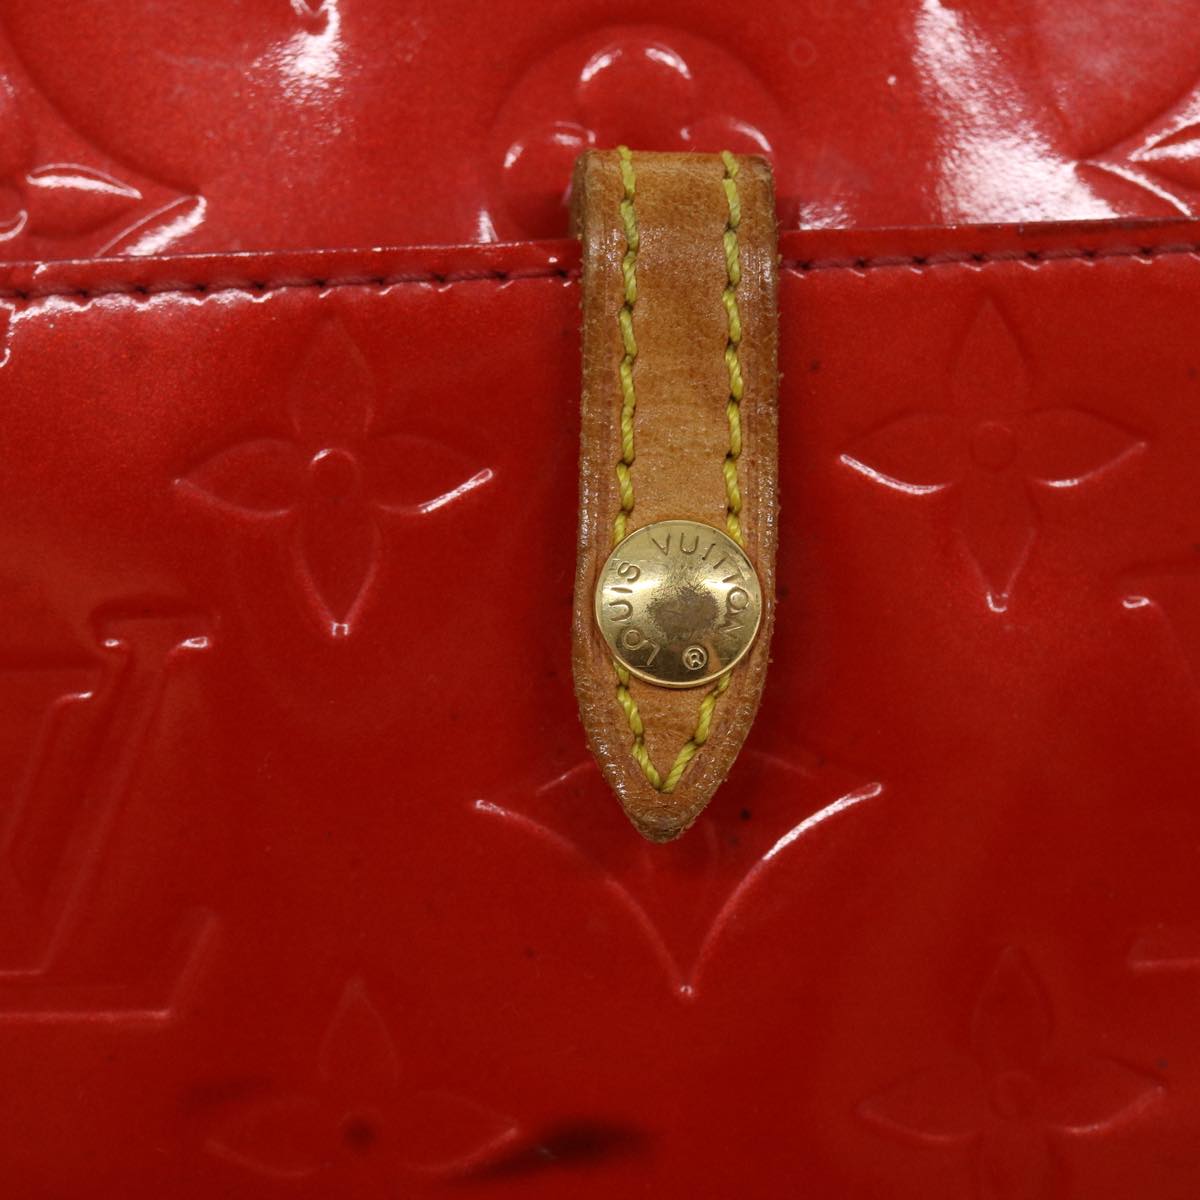 LOUIS VUITTON Monogram Vernis marly square Hand Bag Red LV Auth 37487